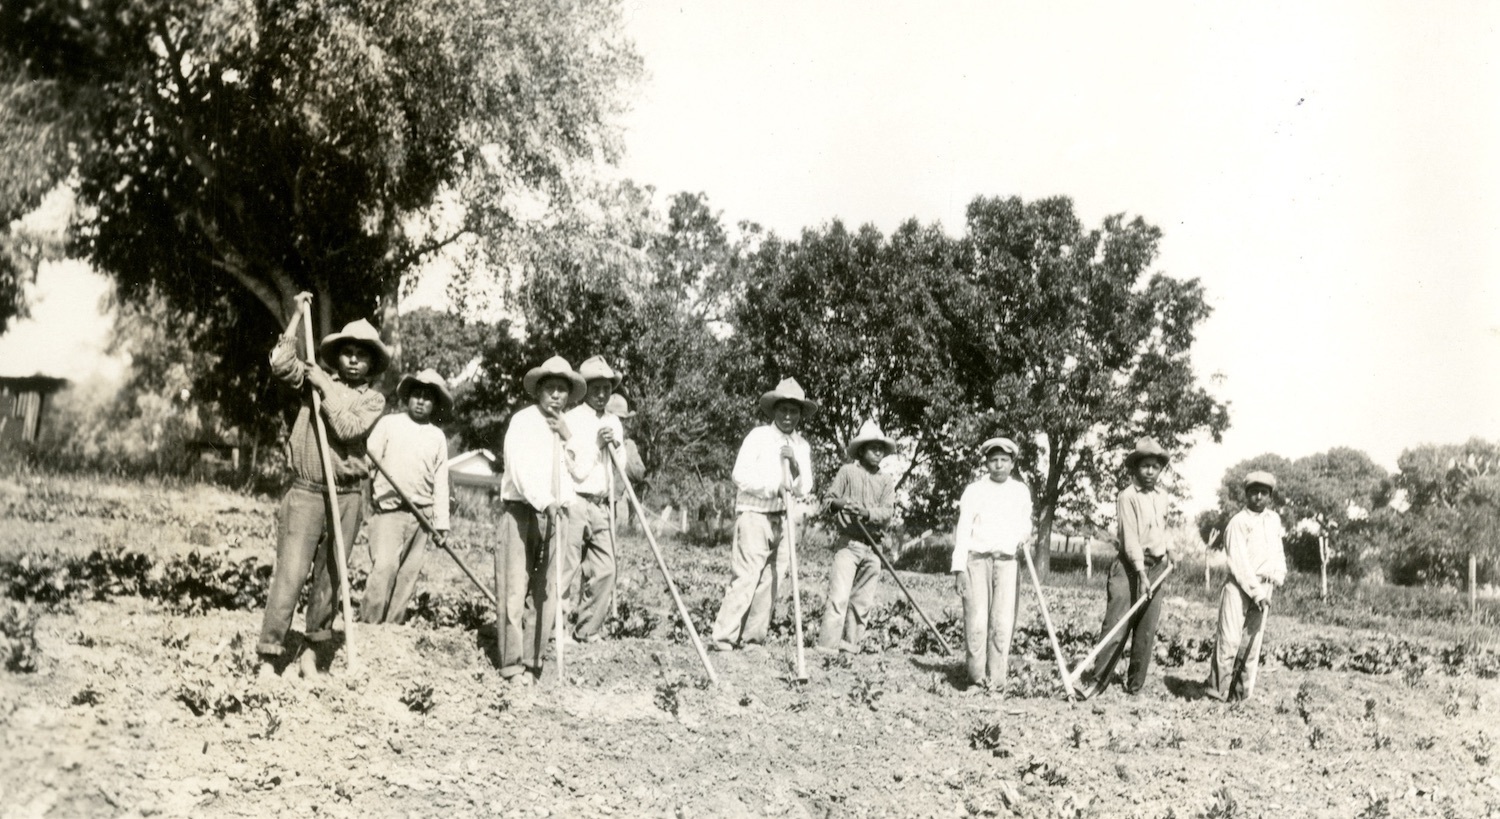 Black and white posed photo of workers standing with hoes/farm instruments. Archival. September 2021